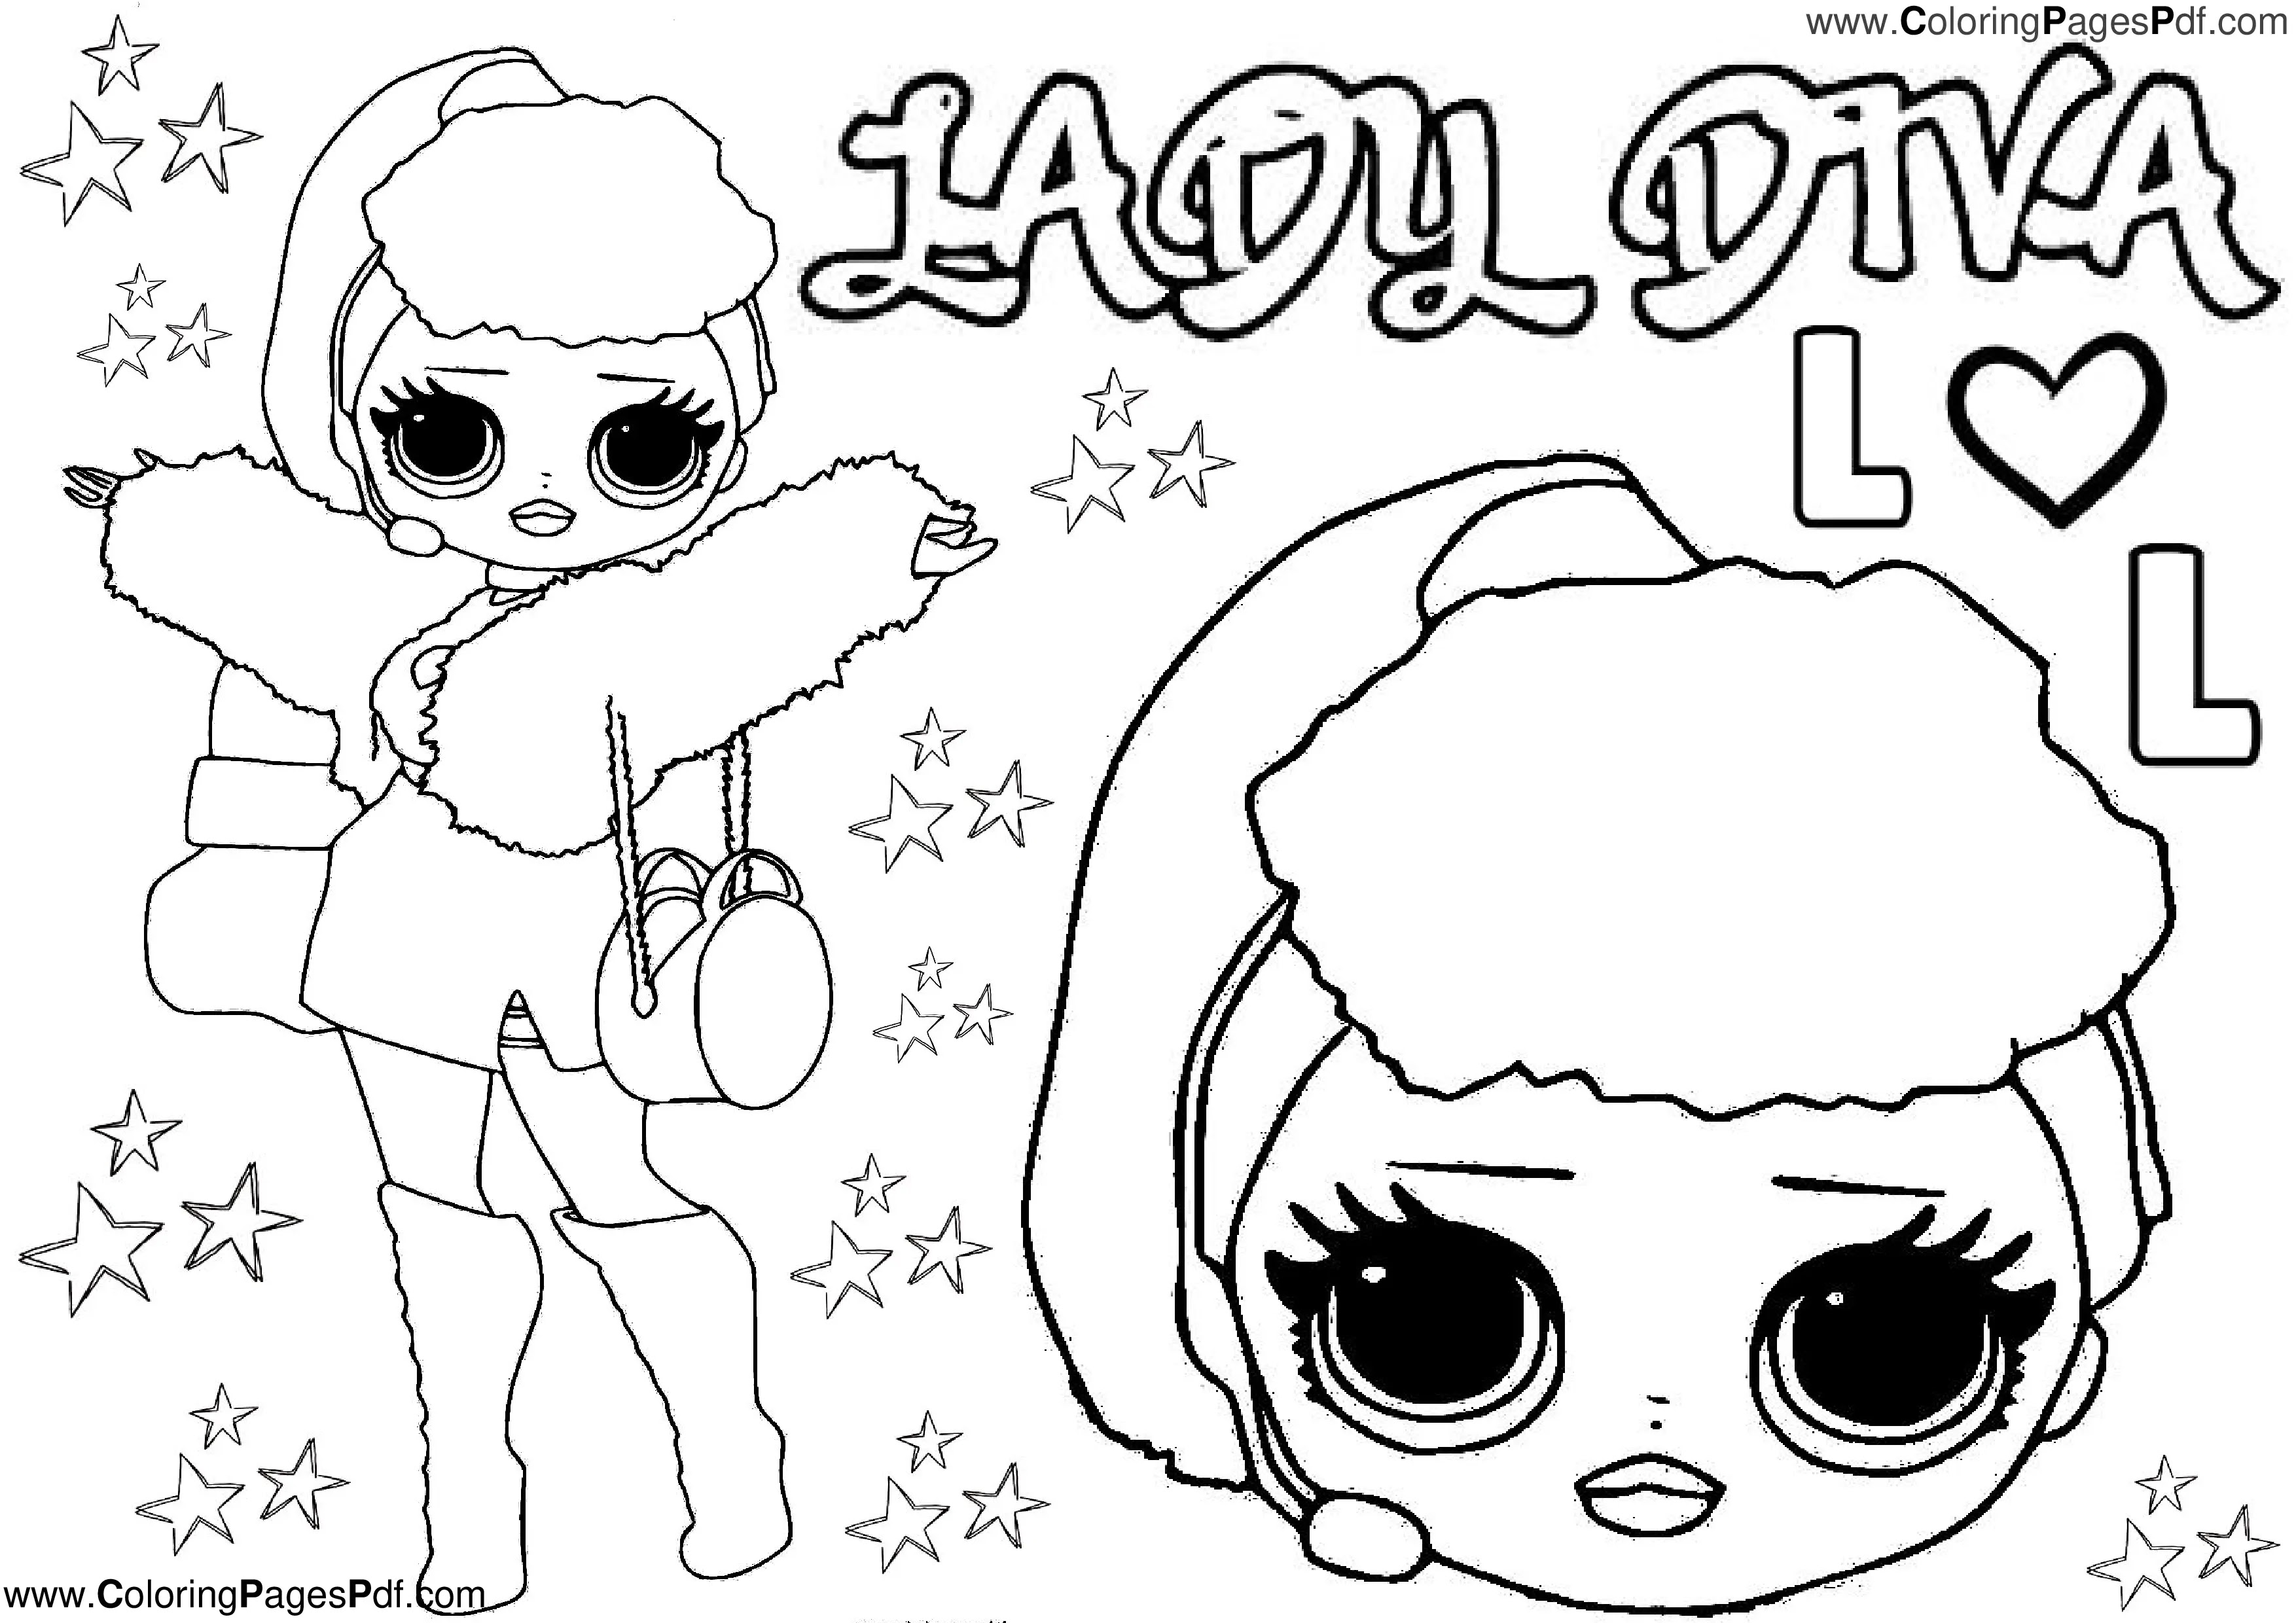 Lol omg lady diva coloring pages